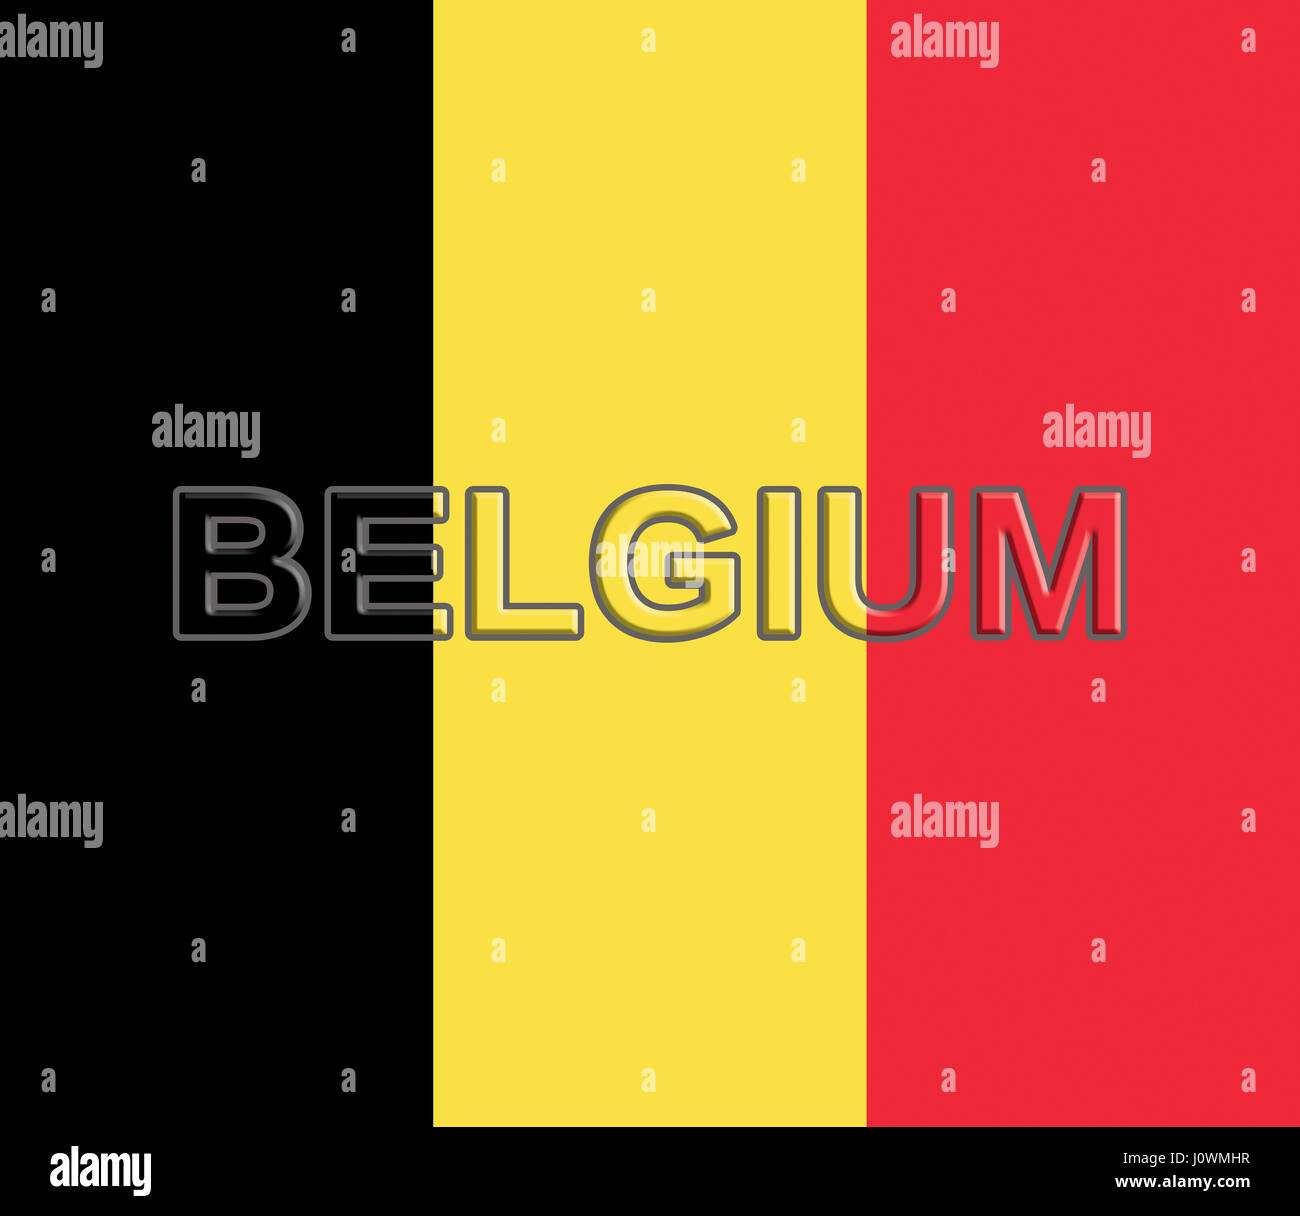 Illustration of the national flag of Belgium with the word Belgium written on the flag Stock Photo